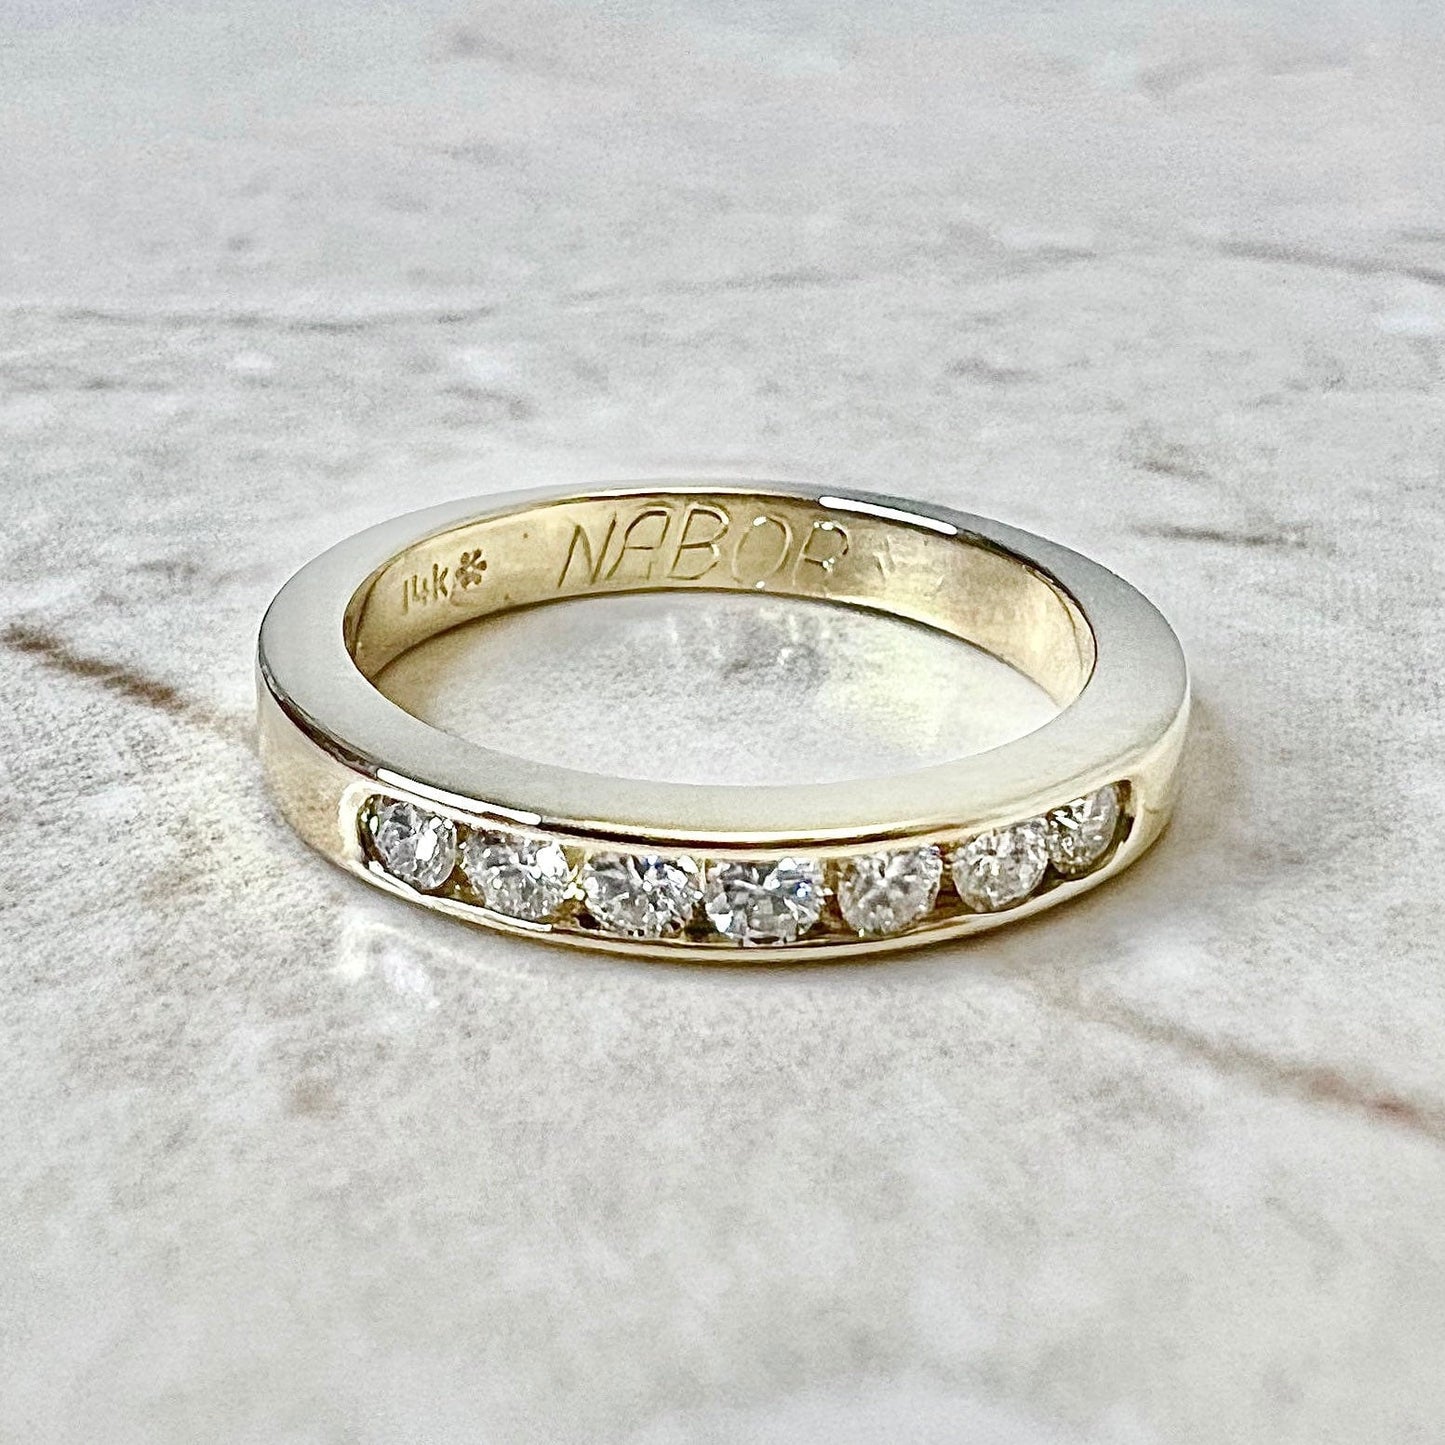 14K 7 Stone Eternity Diamond Band Ring 0.20 CTTW - Yellow Gold Eternity Ring - Anniversary Ring - Wedding Ring - Size 4.75 US - Holiday Gift